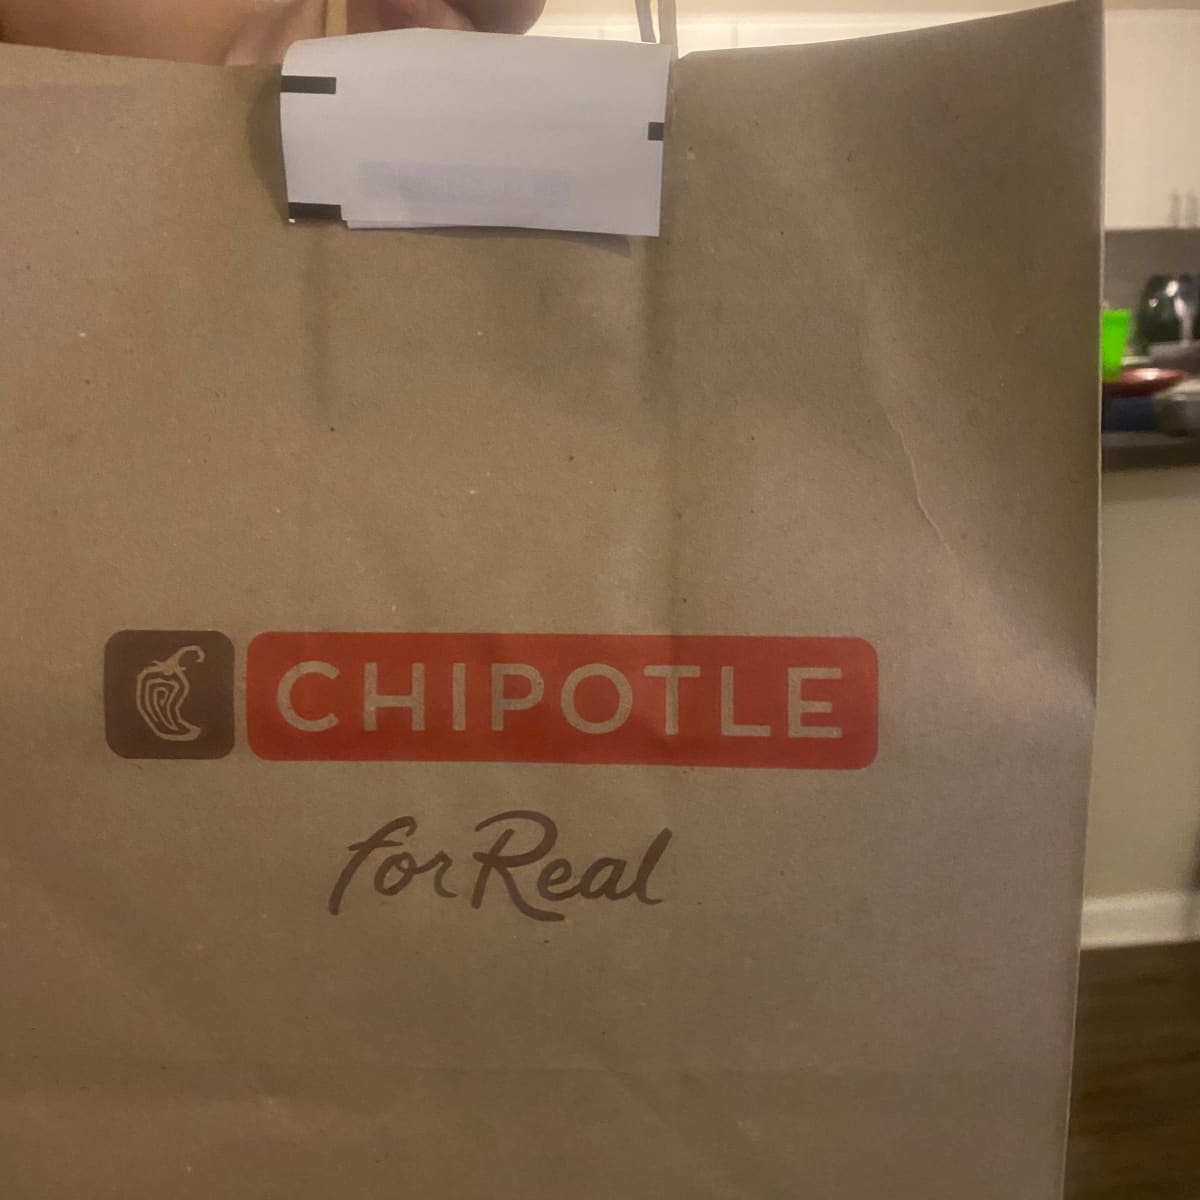 Chipotle Set To Raise Prices For The Fourth Time In 2 Years As Superfans  React: 'Corporate Greed Is Out Of Control' - SHEfinds